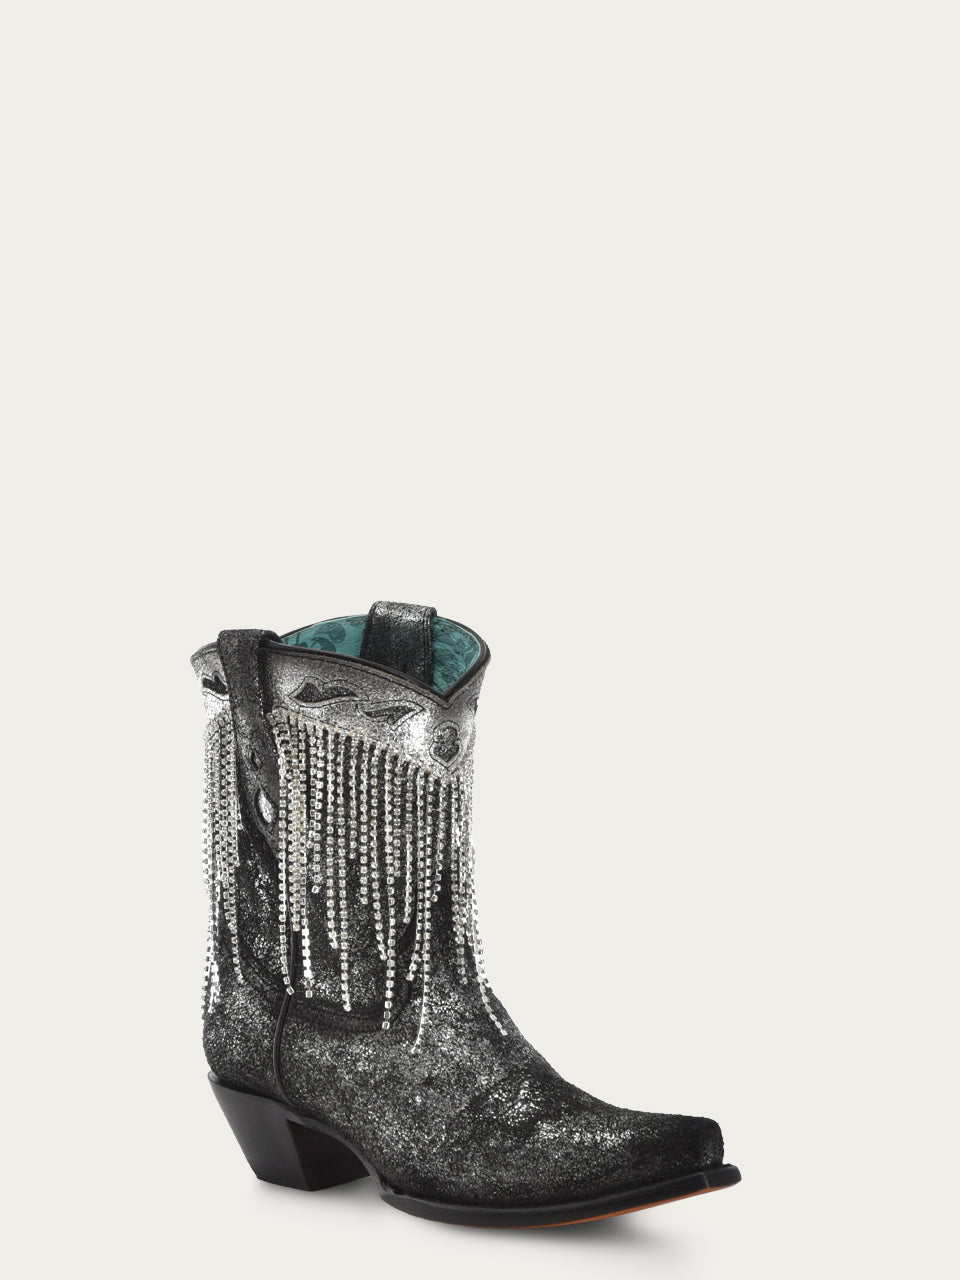 crystals fringe black and silver ankle boot - womens boots